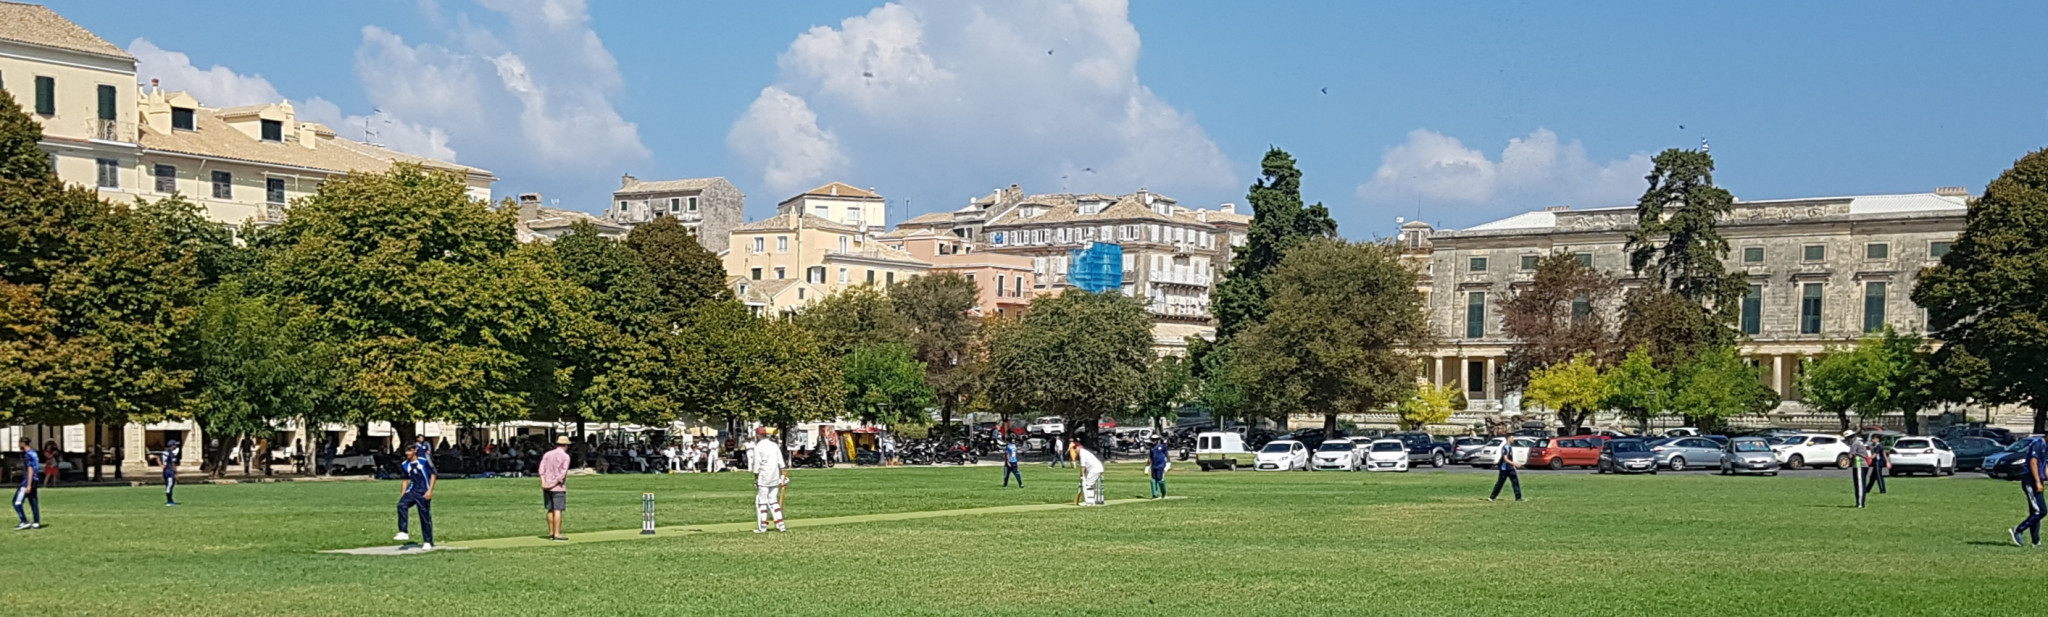 The Authors Cricket Club managed to enjoy a victory on the tour, the team's first win on Greek soil ©David Owen